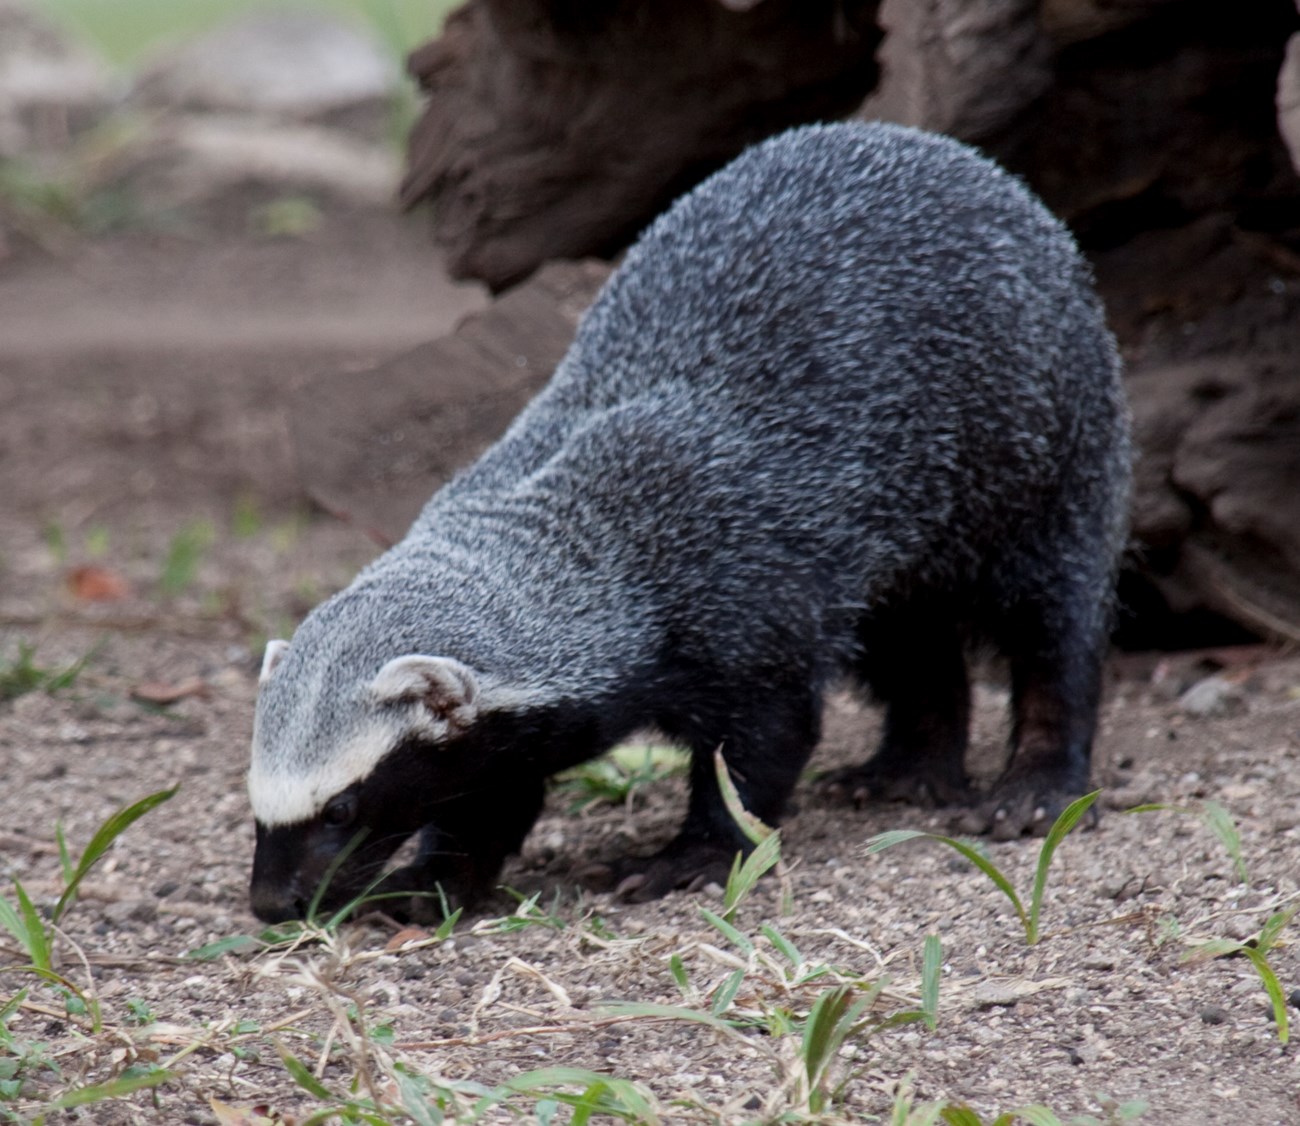 a small badger-like animal with a gradation of black, white, and gray fur. Its nose is to the ground